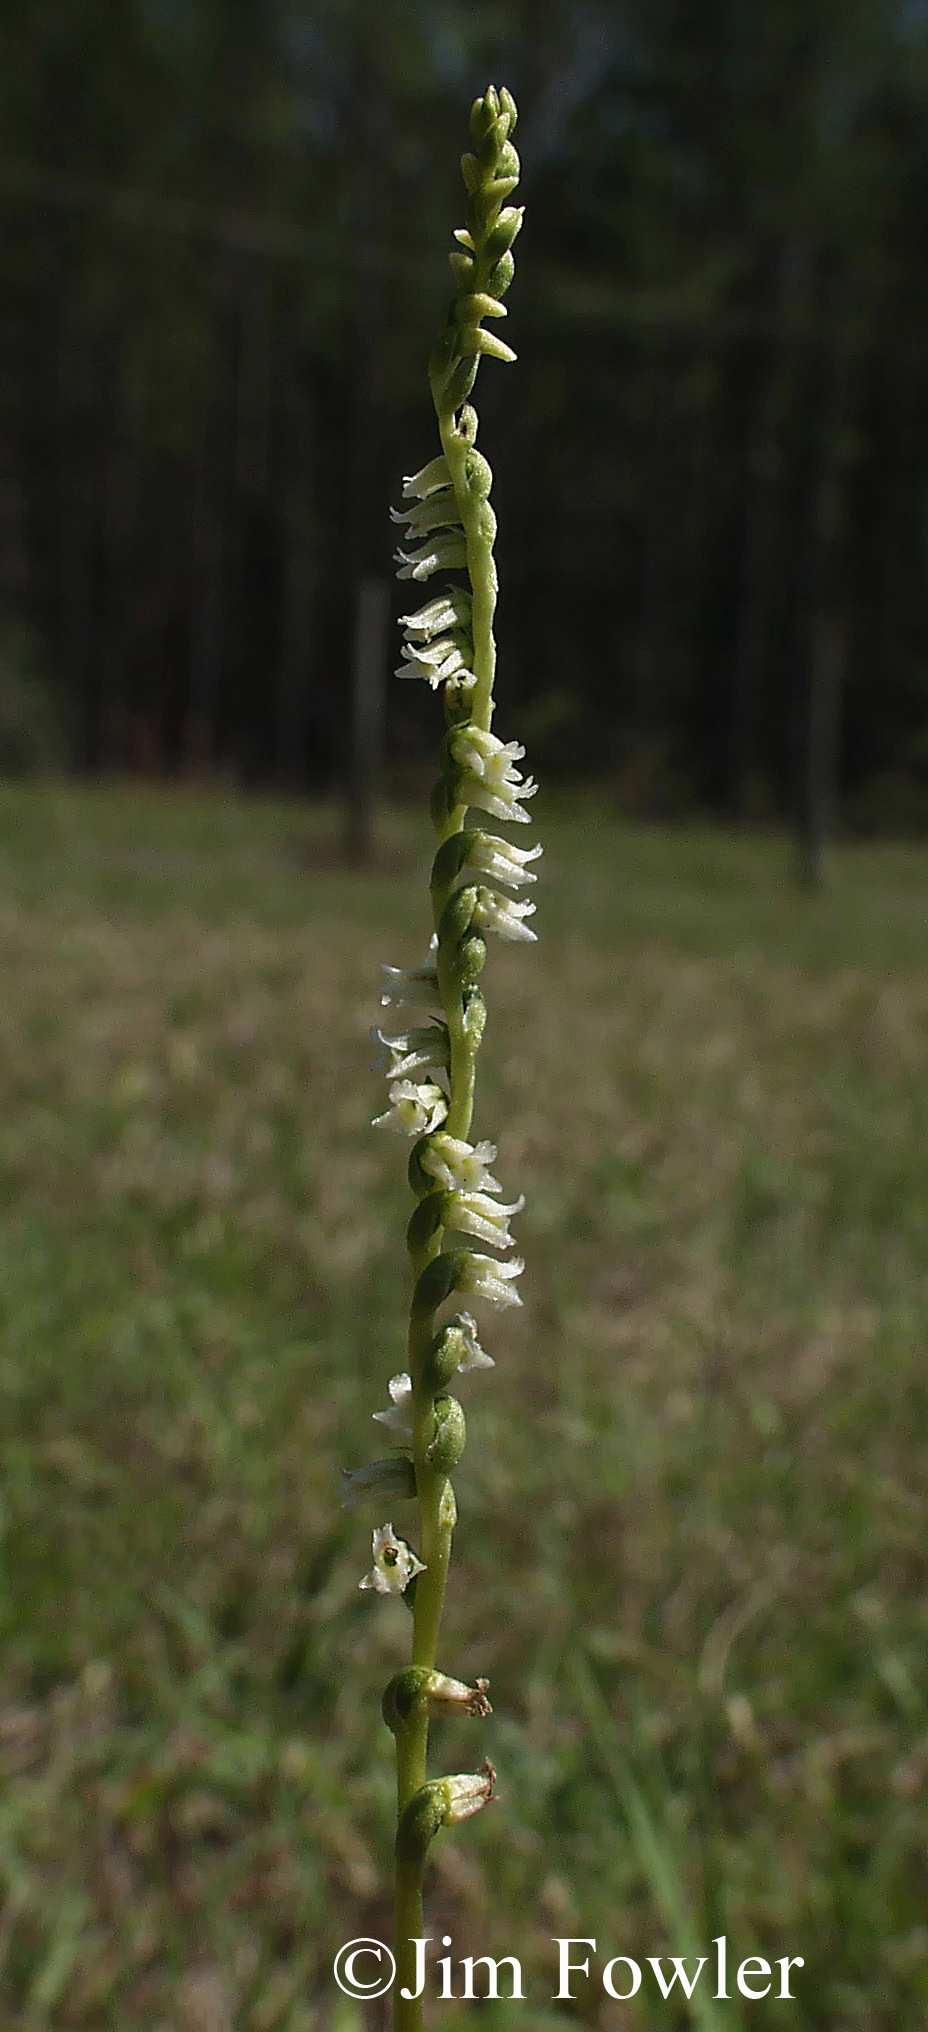 Common Name: FLORIDA LADIES-TRESSES Scientific Name: Spiranthes floridana (Wherry) Cory Other Commonly Used Names: none Previously Used Scientific Names: Spiranthes brevilabris